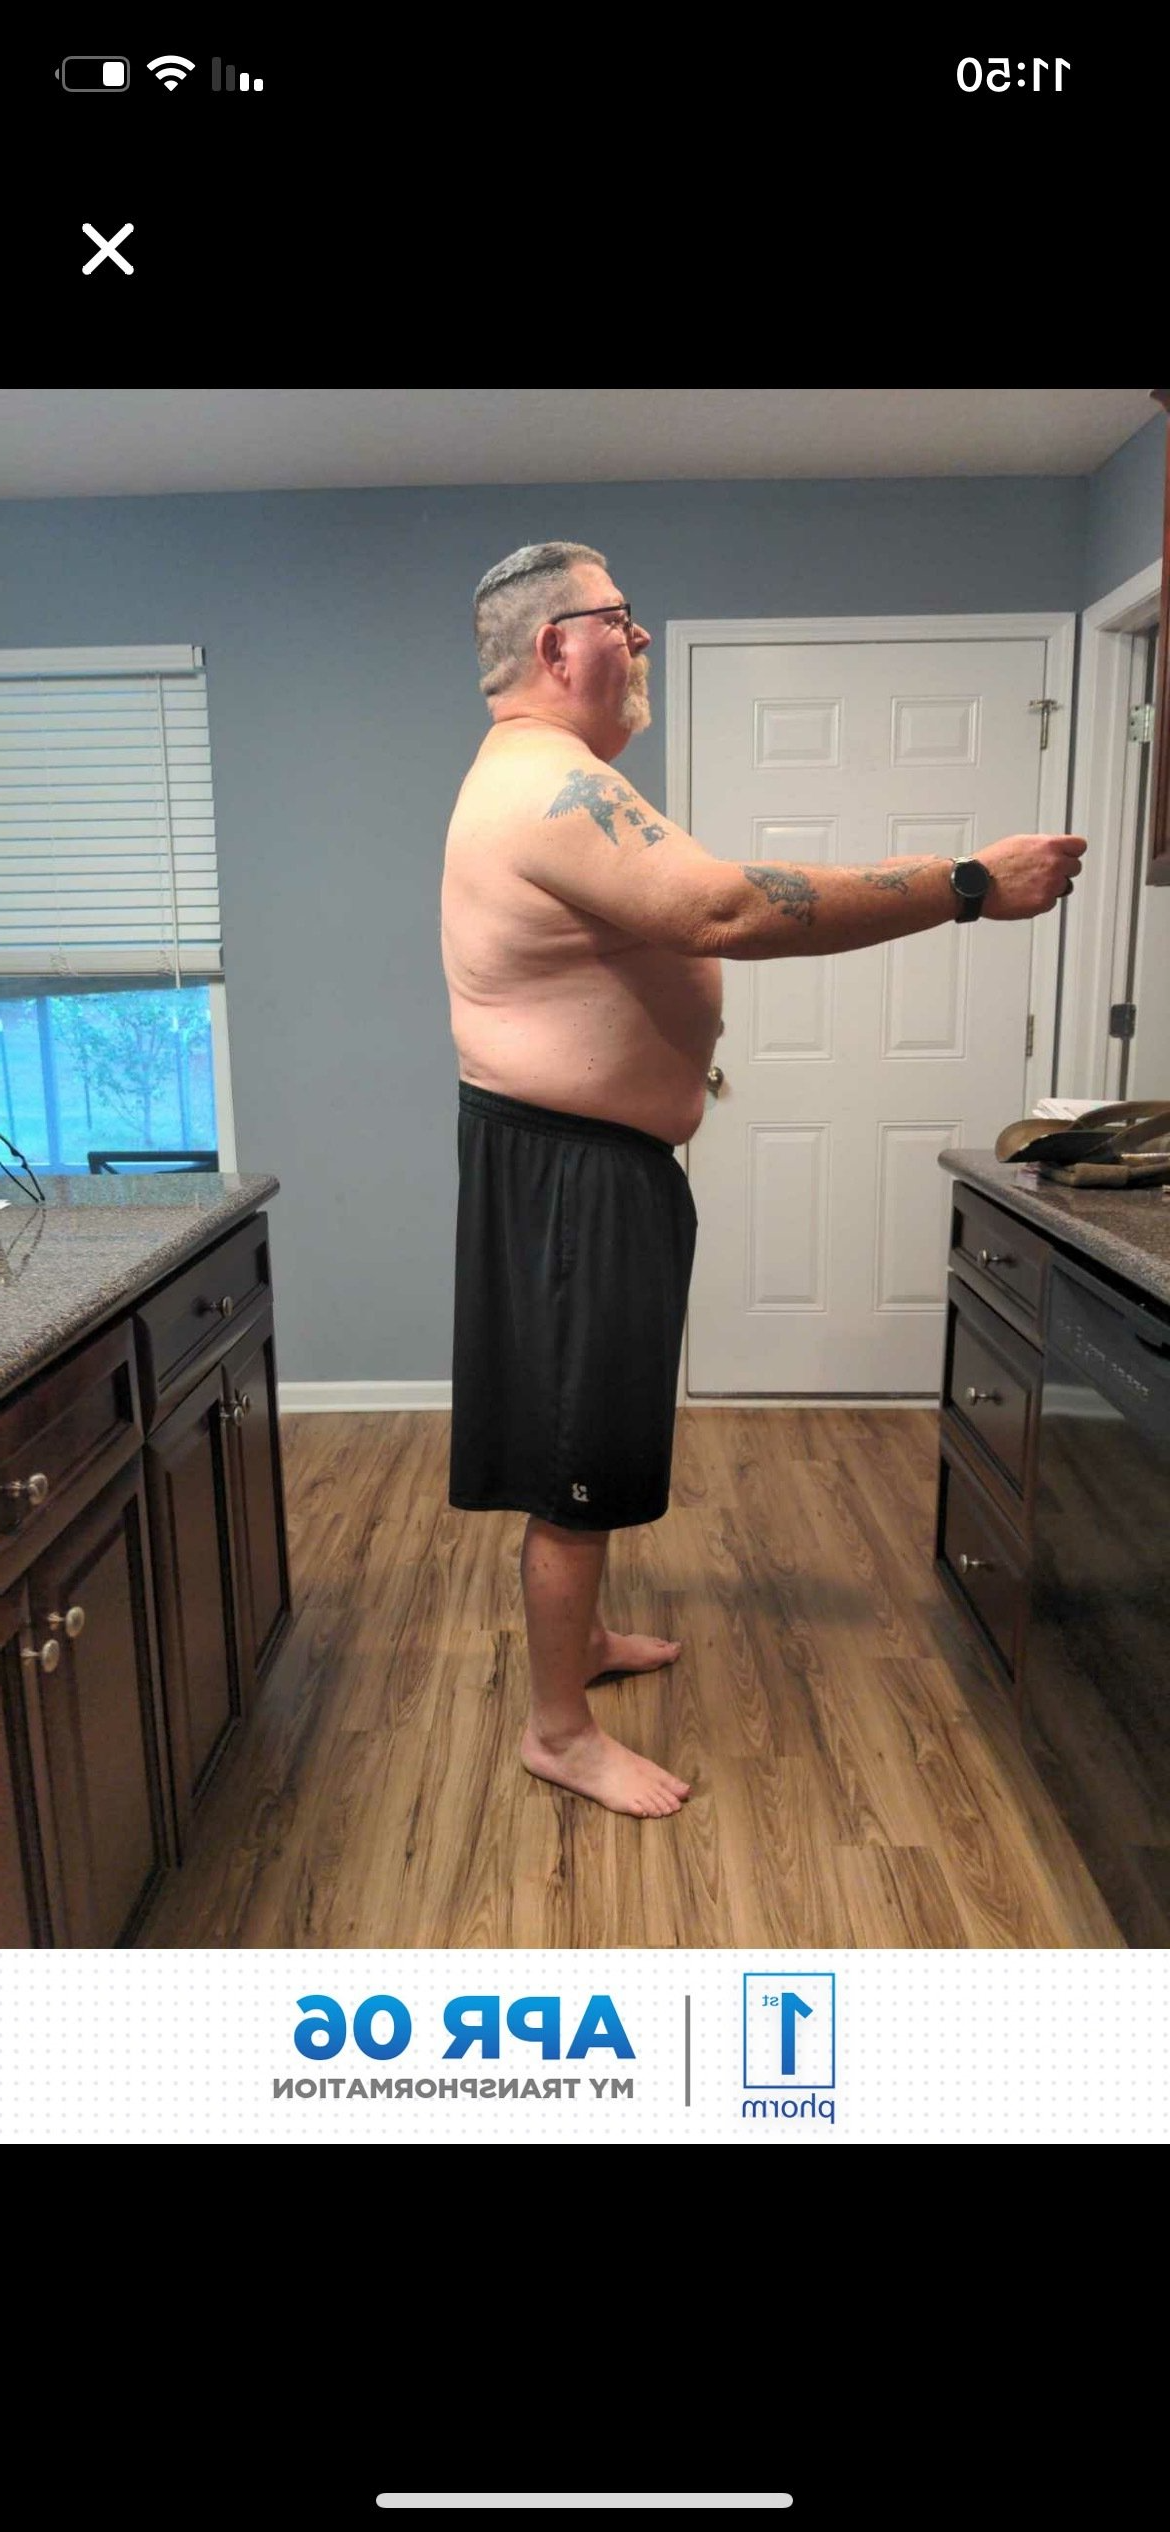 A shirtless man is standing in a kitchen.